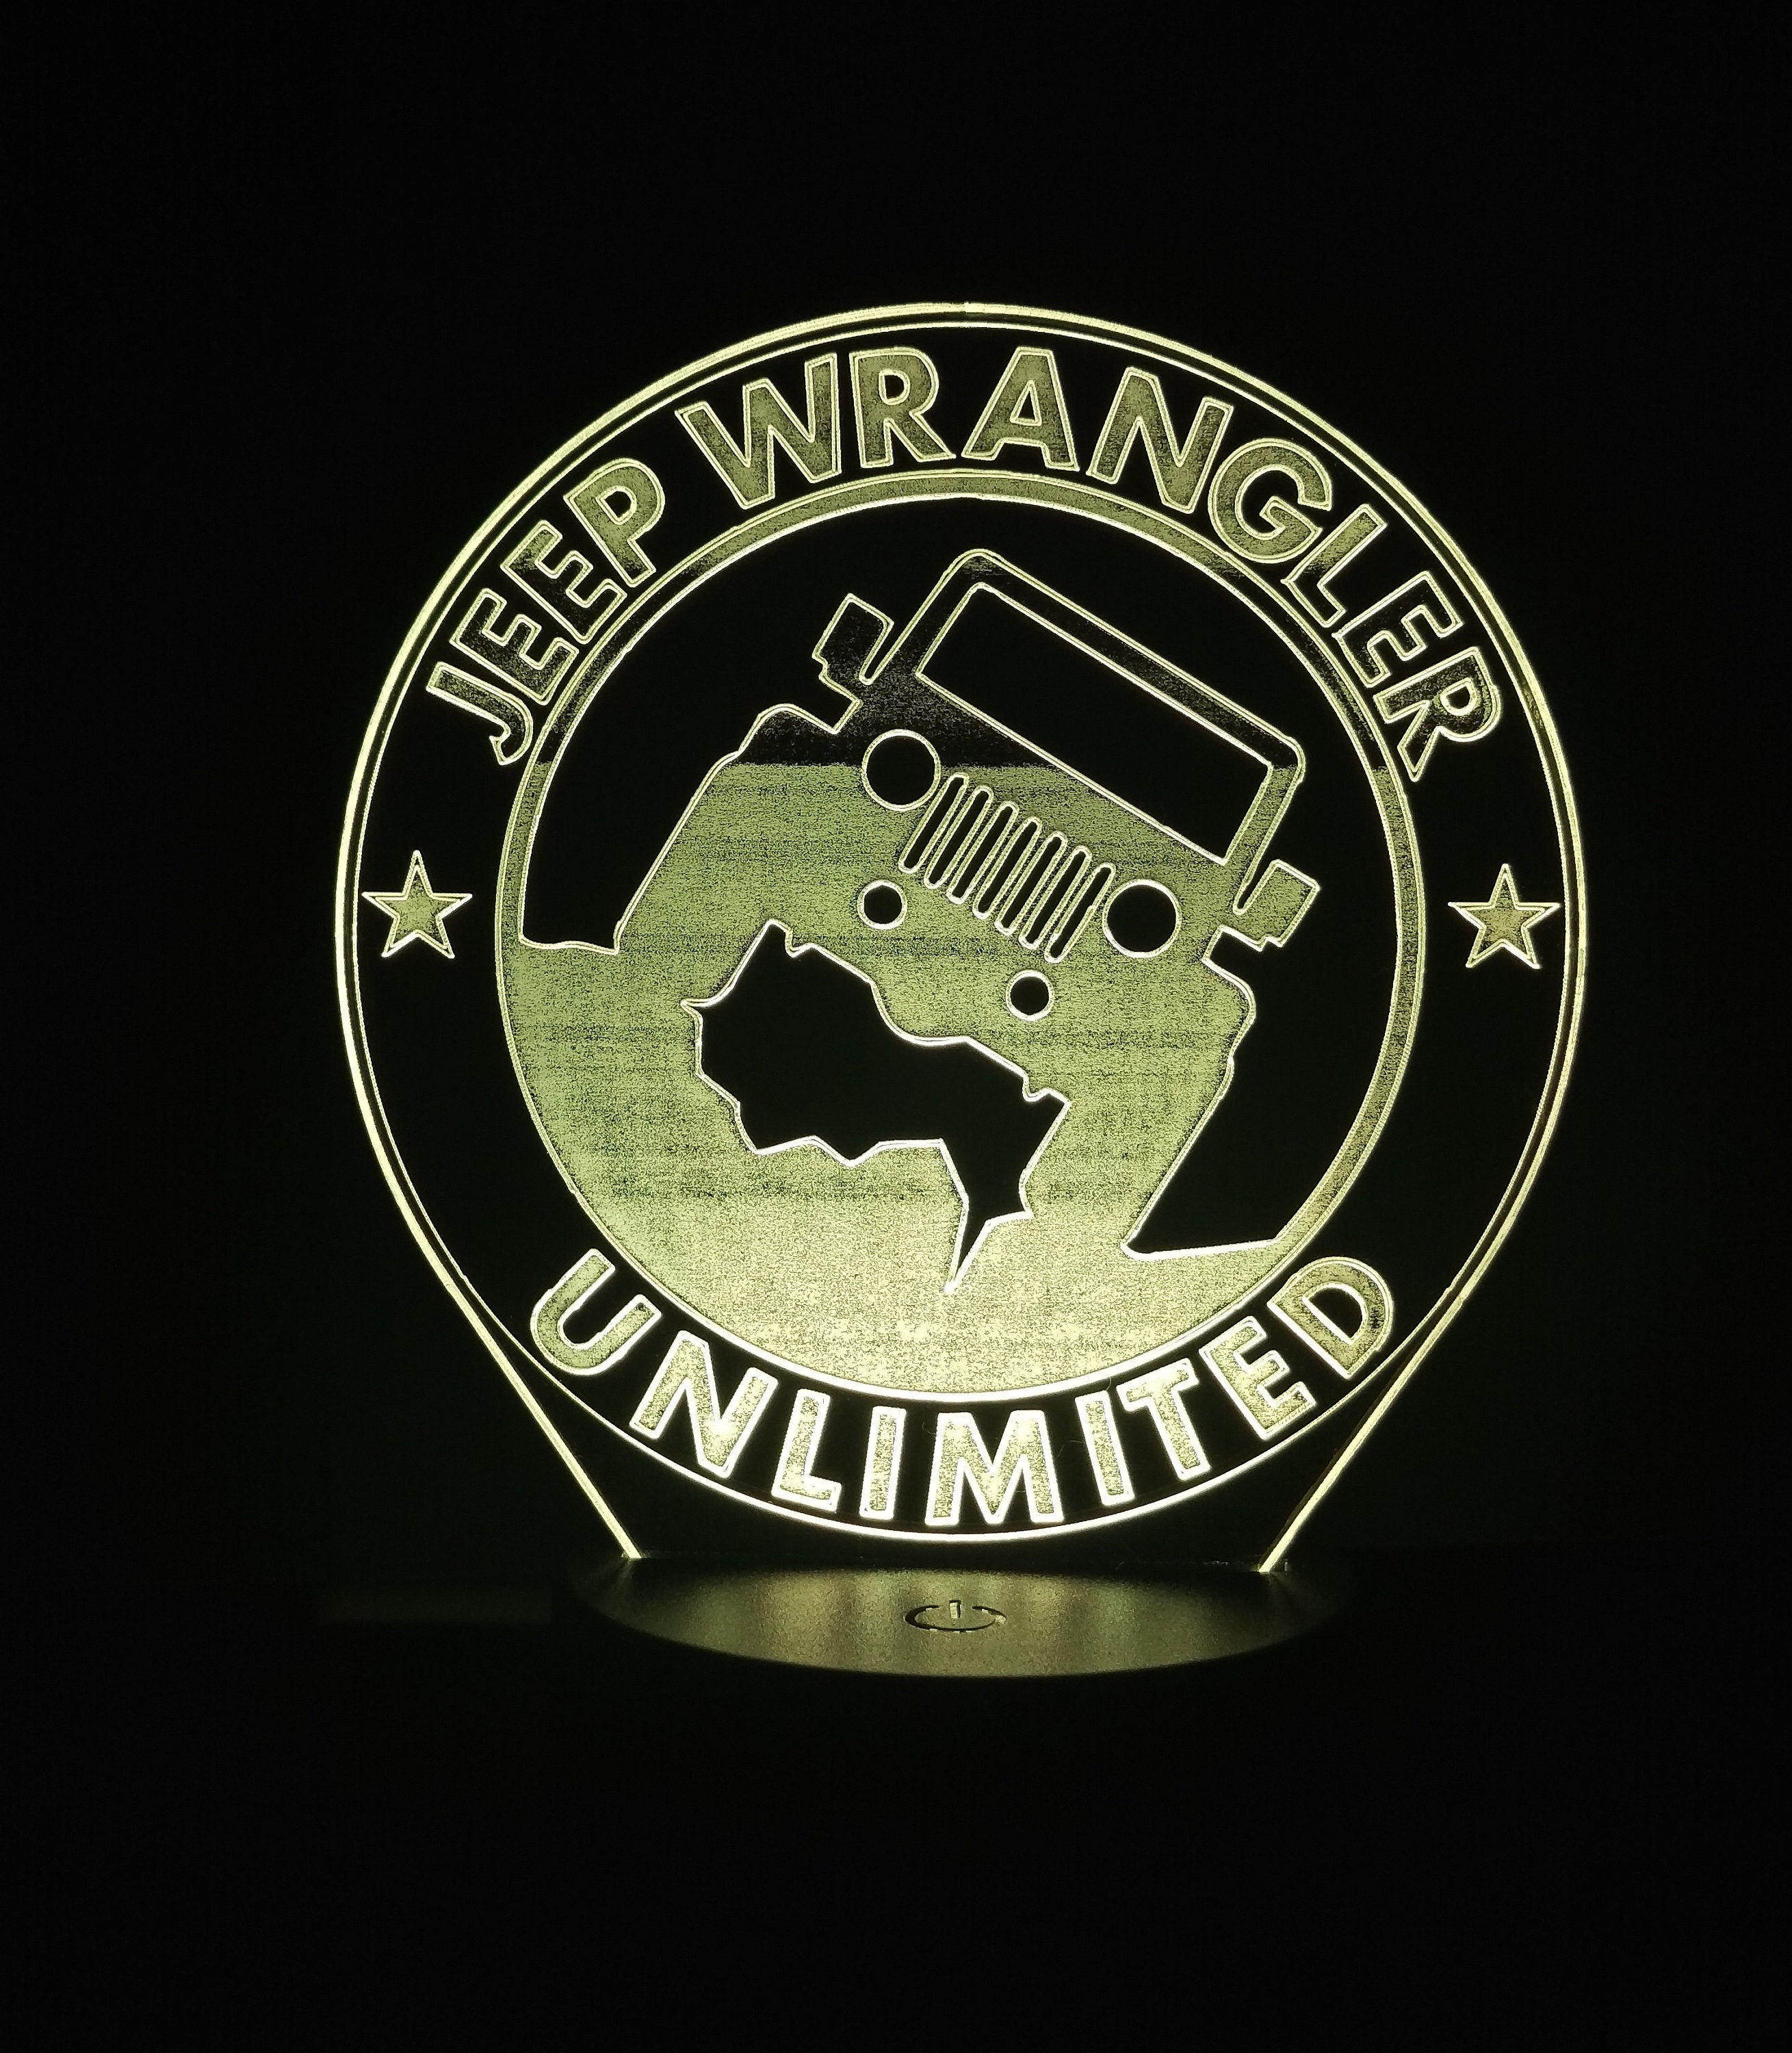 Awesome "Jeep Wrangler - Unlimited" LED lamp (1105) - FREE SHIPPING!